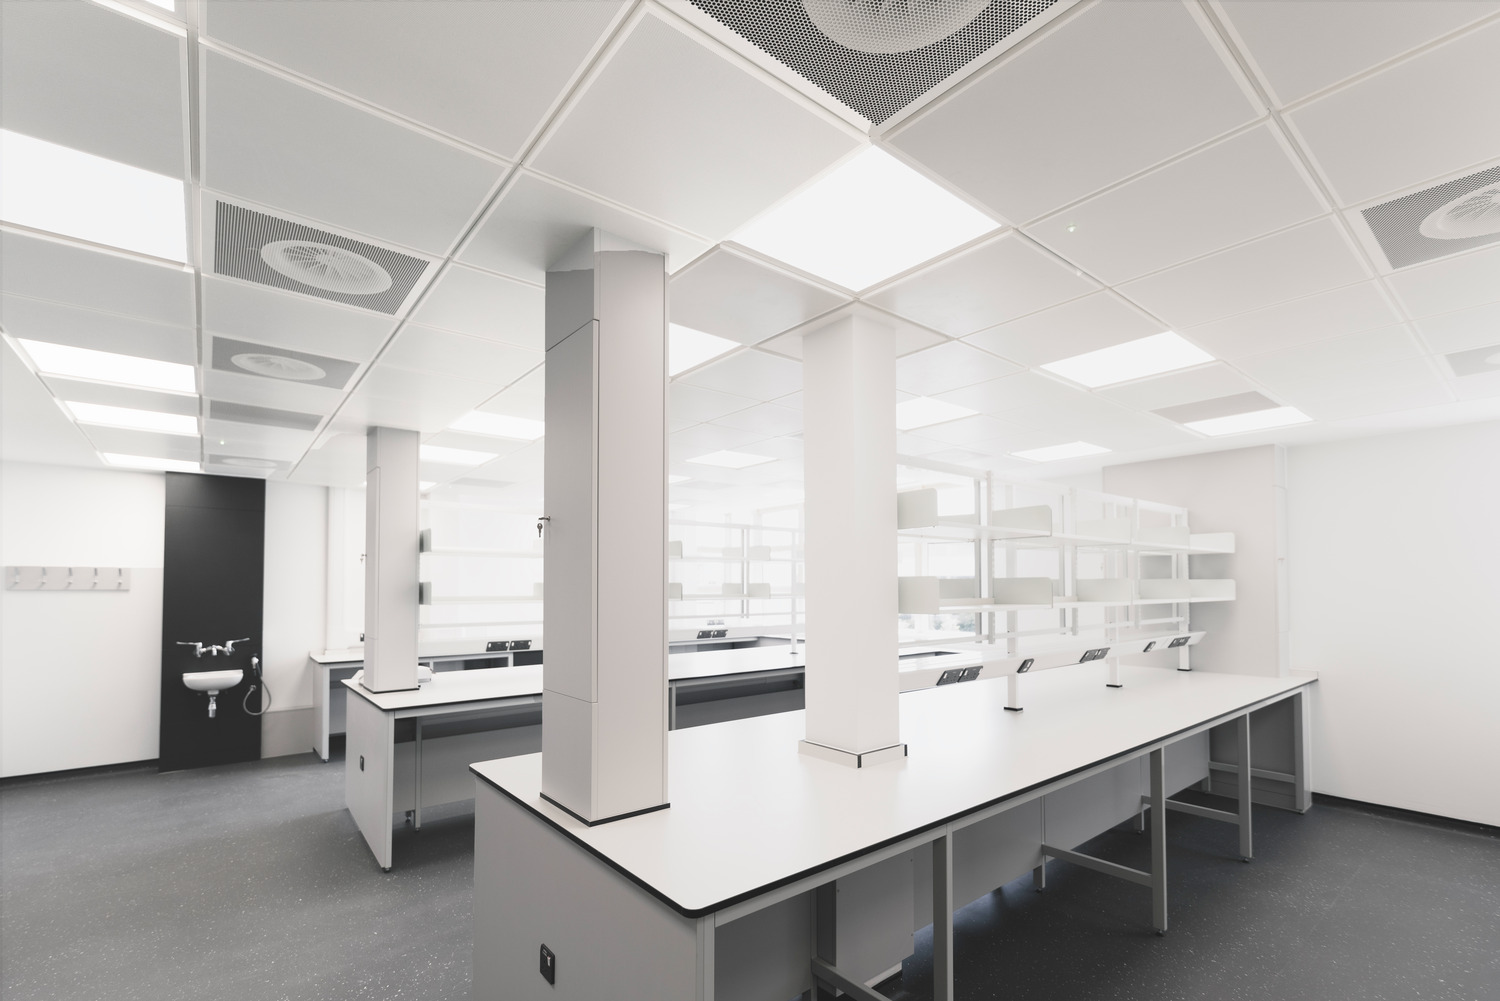 A comprehensive retrofit of offices into high-grade laboratory space 